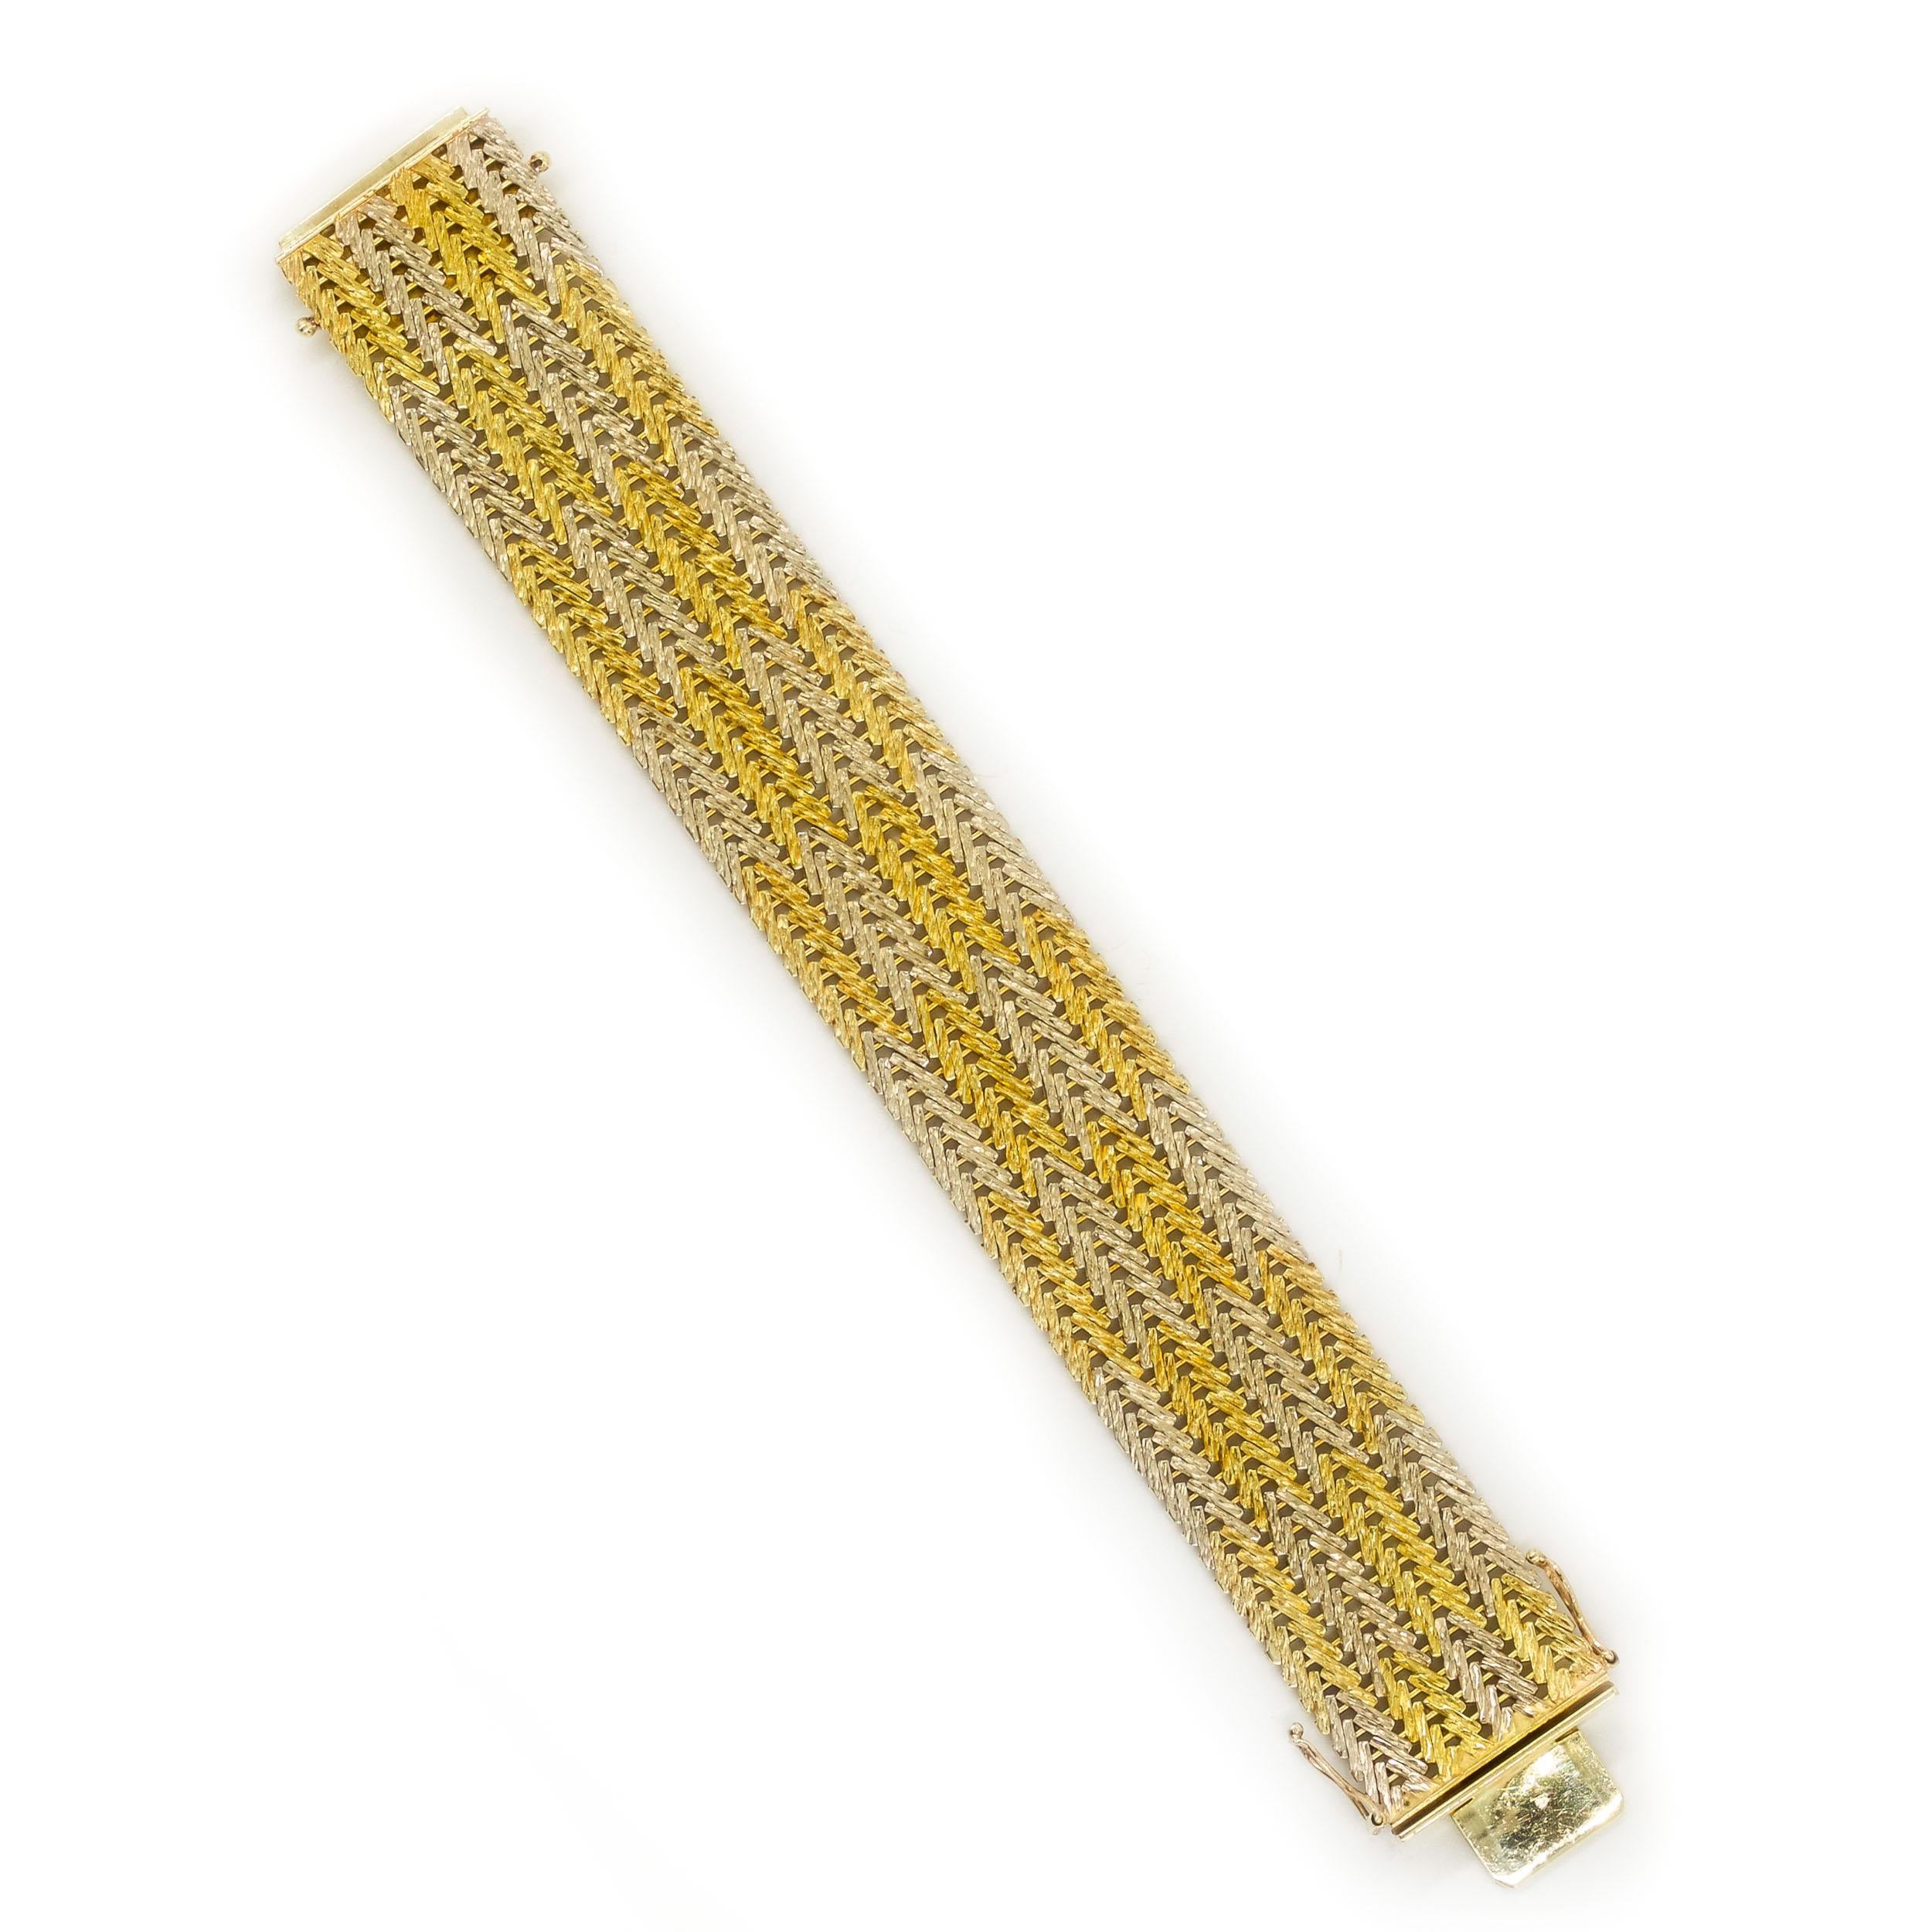 ESTATE 14K YELLOW AND WHITE GOLD TEXTURED BAR-LINK FLEXIBLE STRAP BRACELET
Circa mid-20th century  68.5 grams total weight  6 3/4